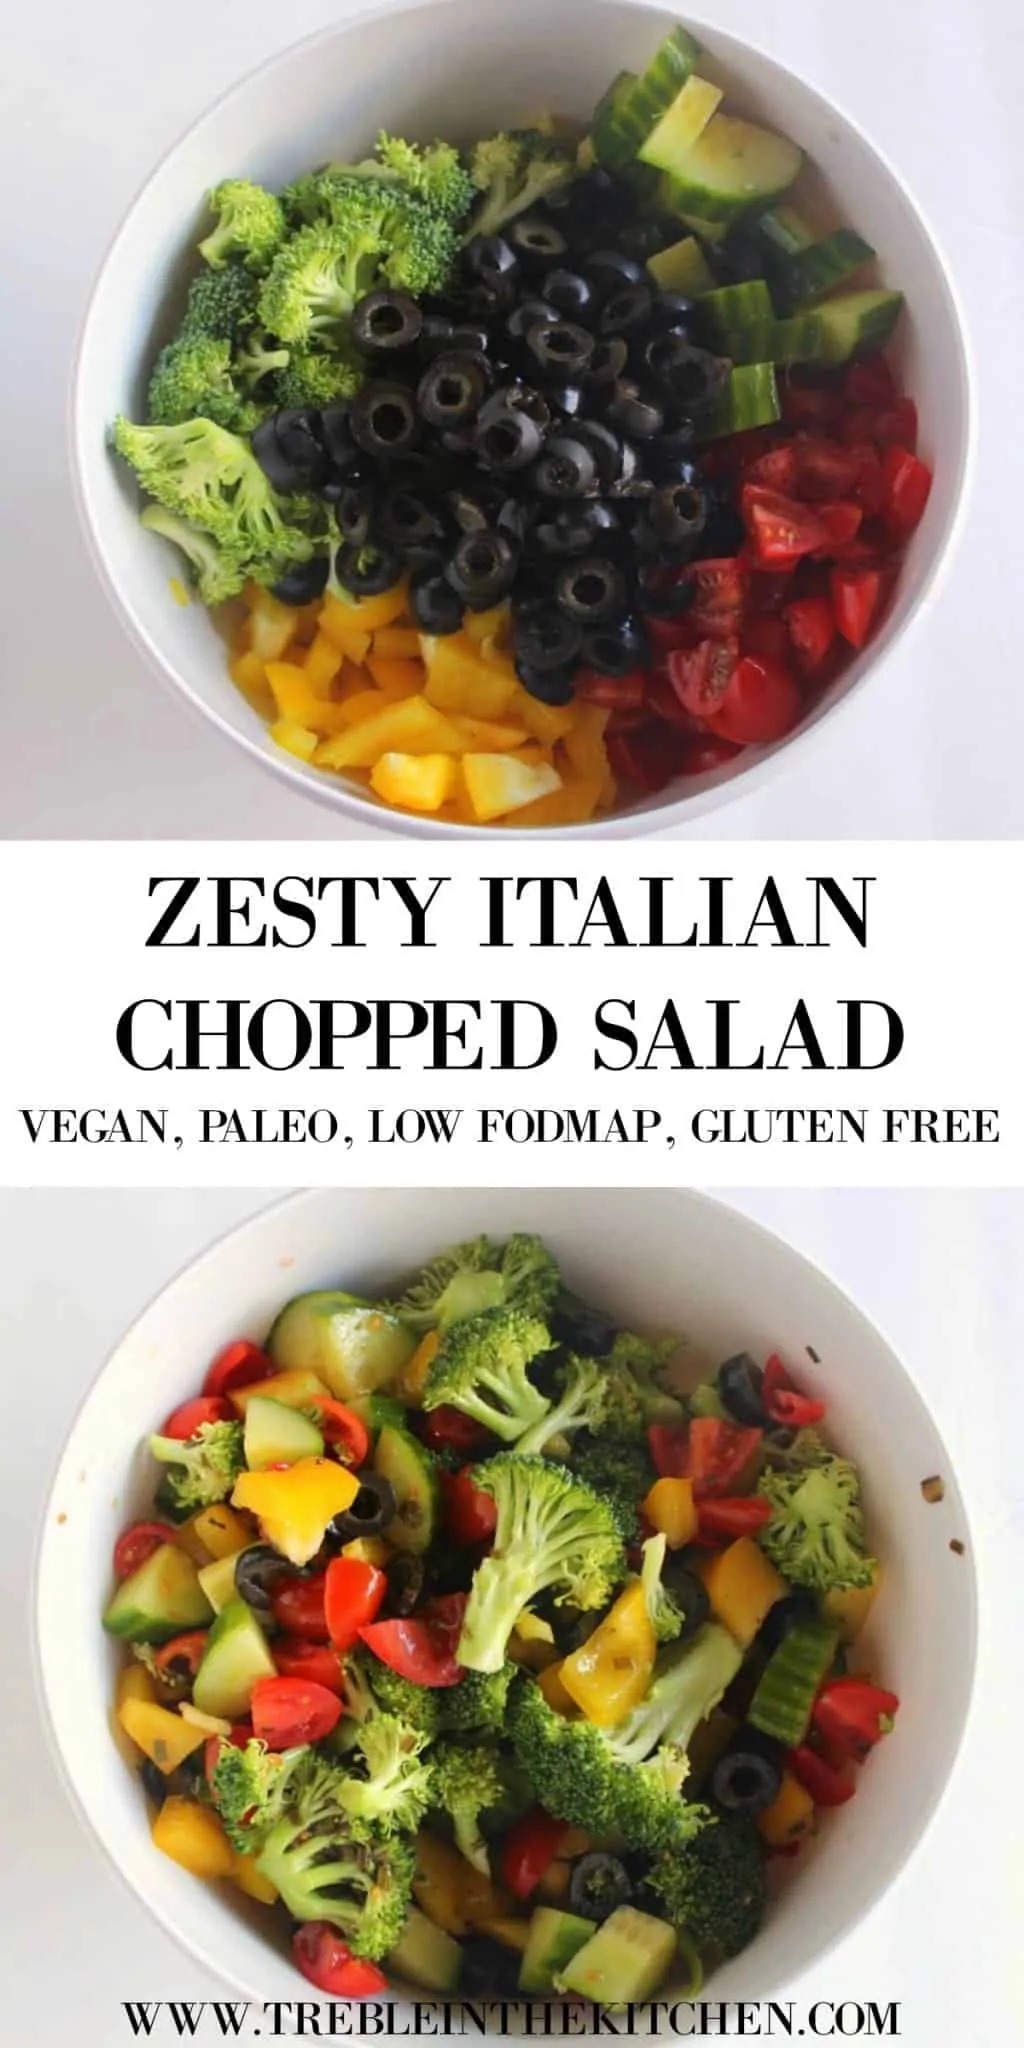 Zesty Italian Chopped Salad from Treble in the Kitchen